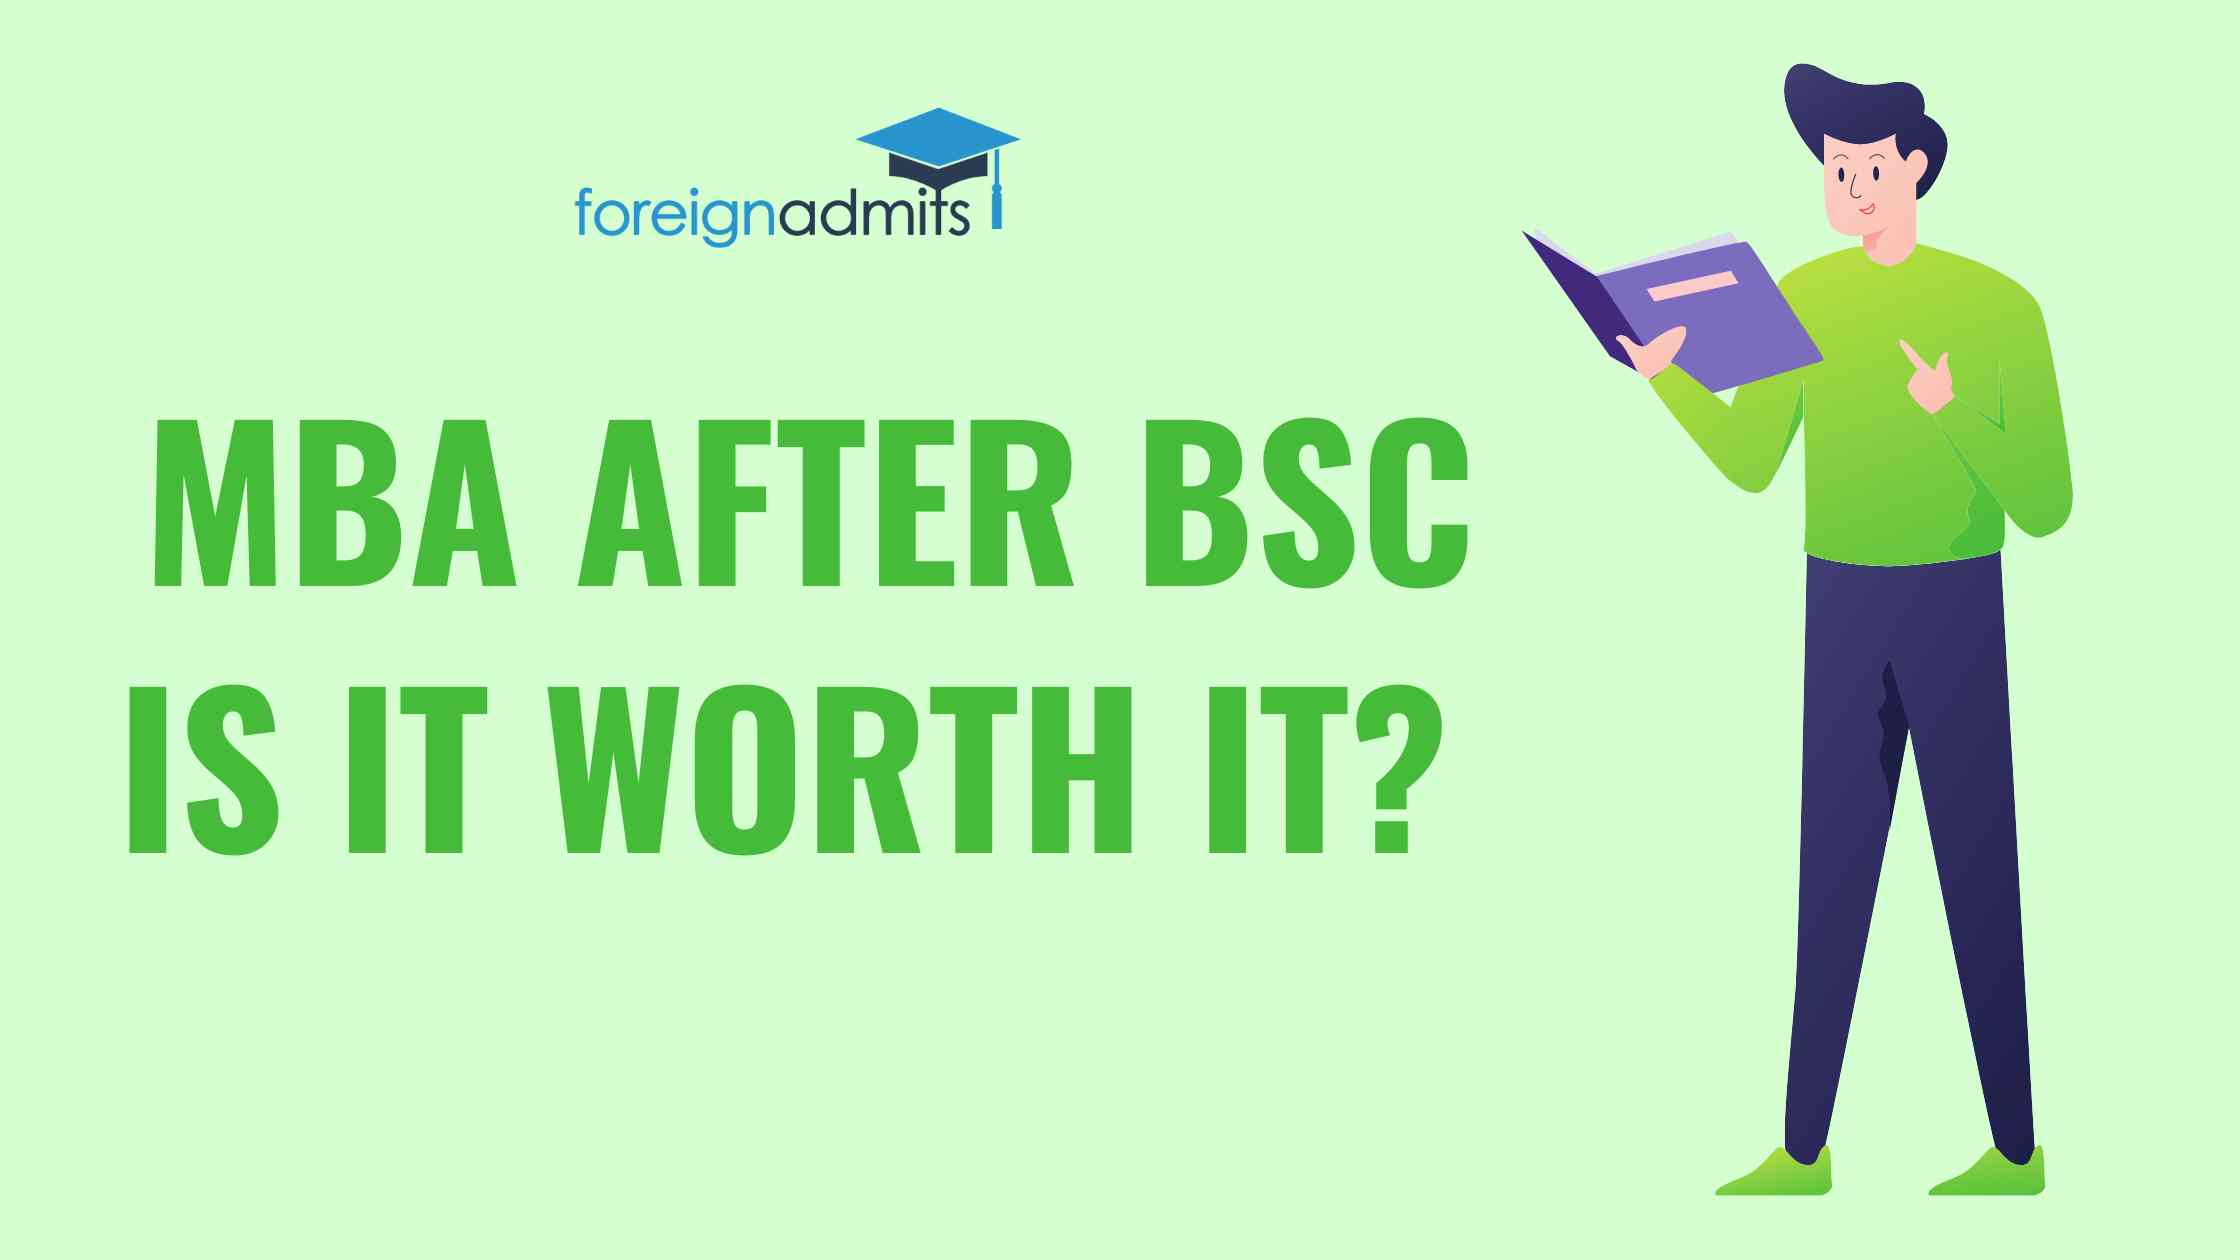 MBA after BSc? Is it worth it?